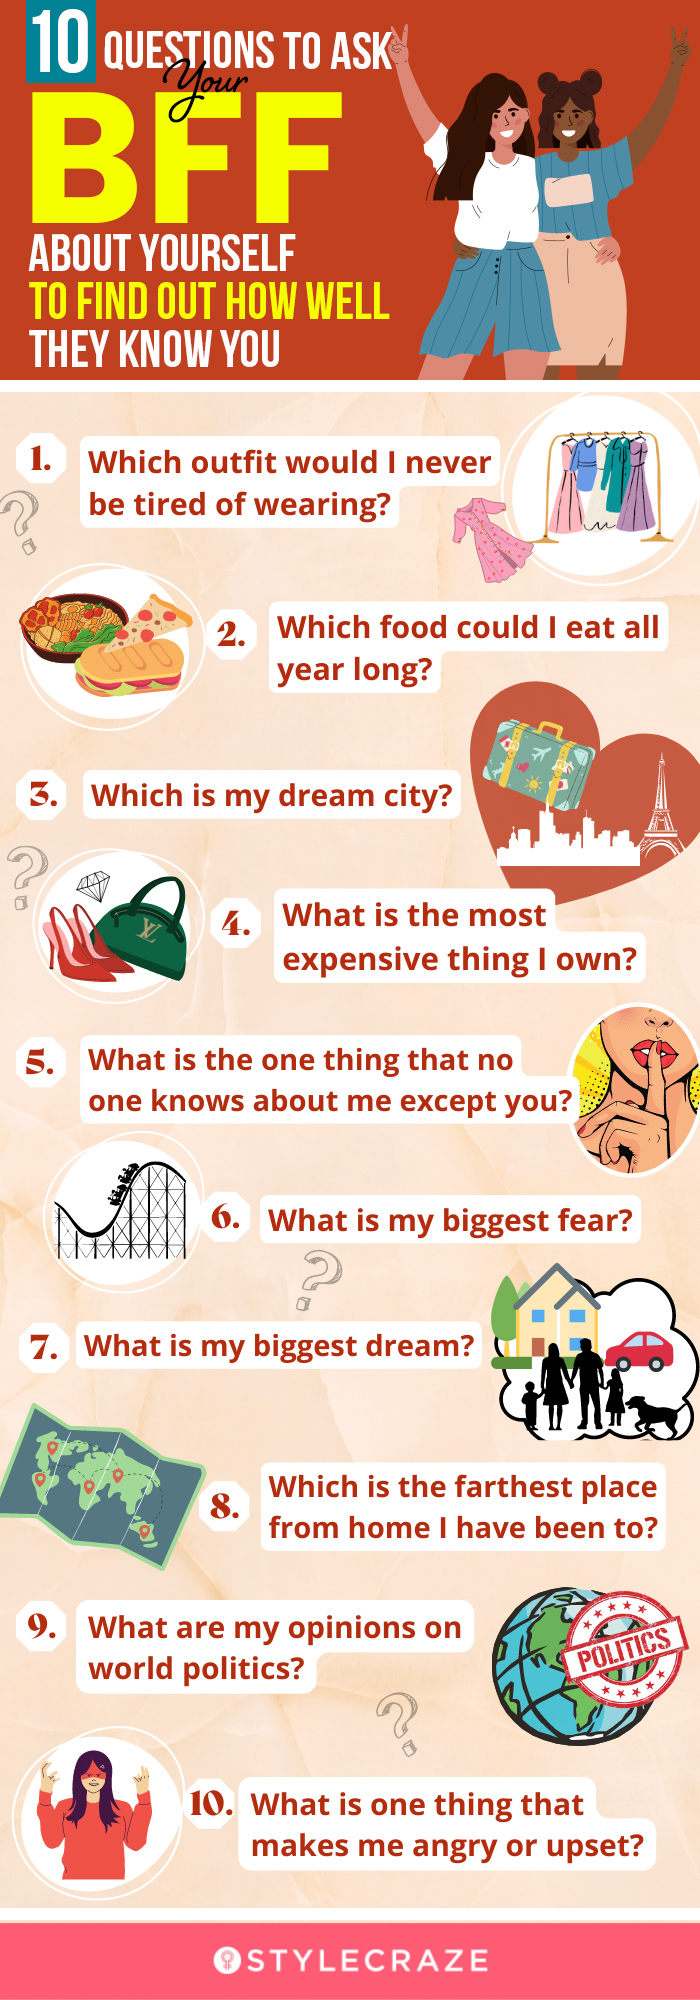 10 questions to ask your bff about yourself to find out how well they know you [infographic]